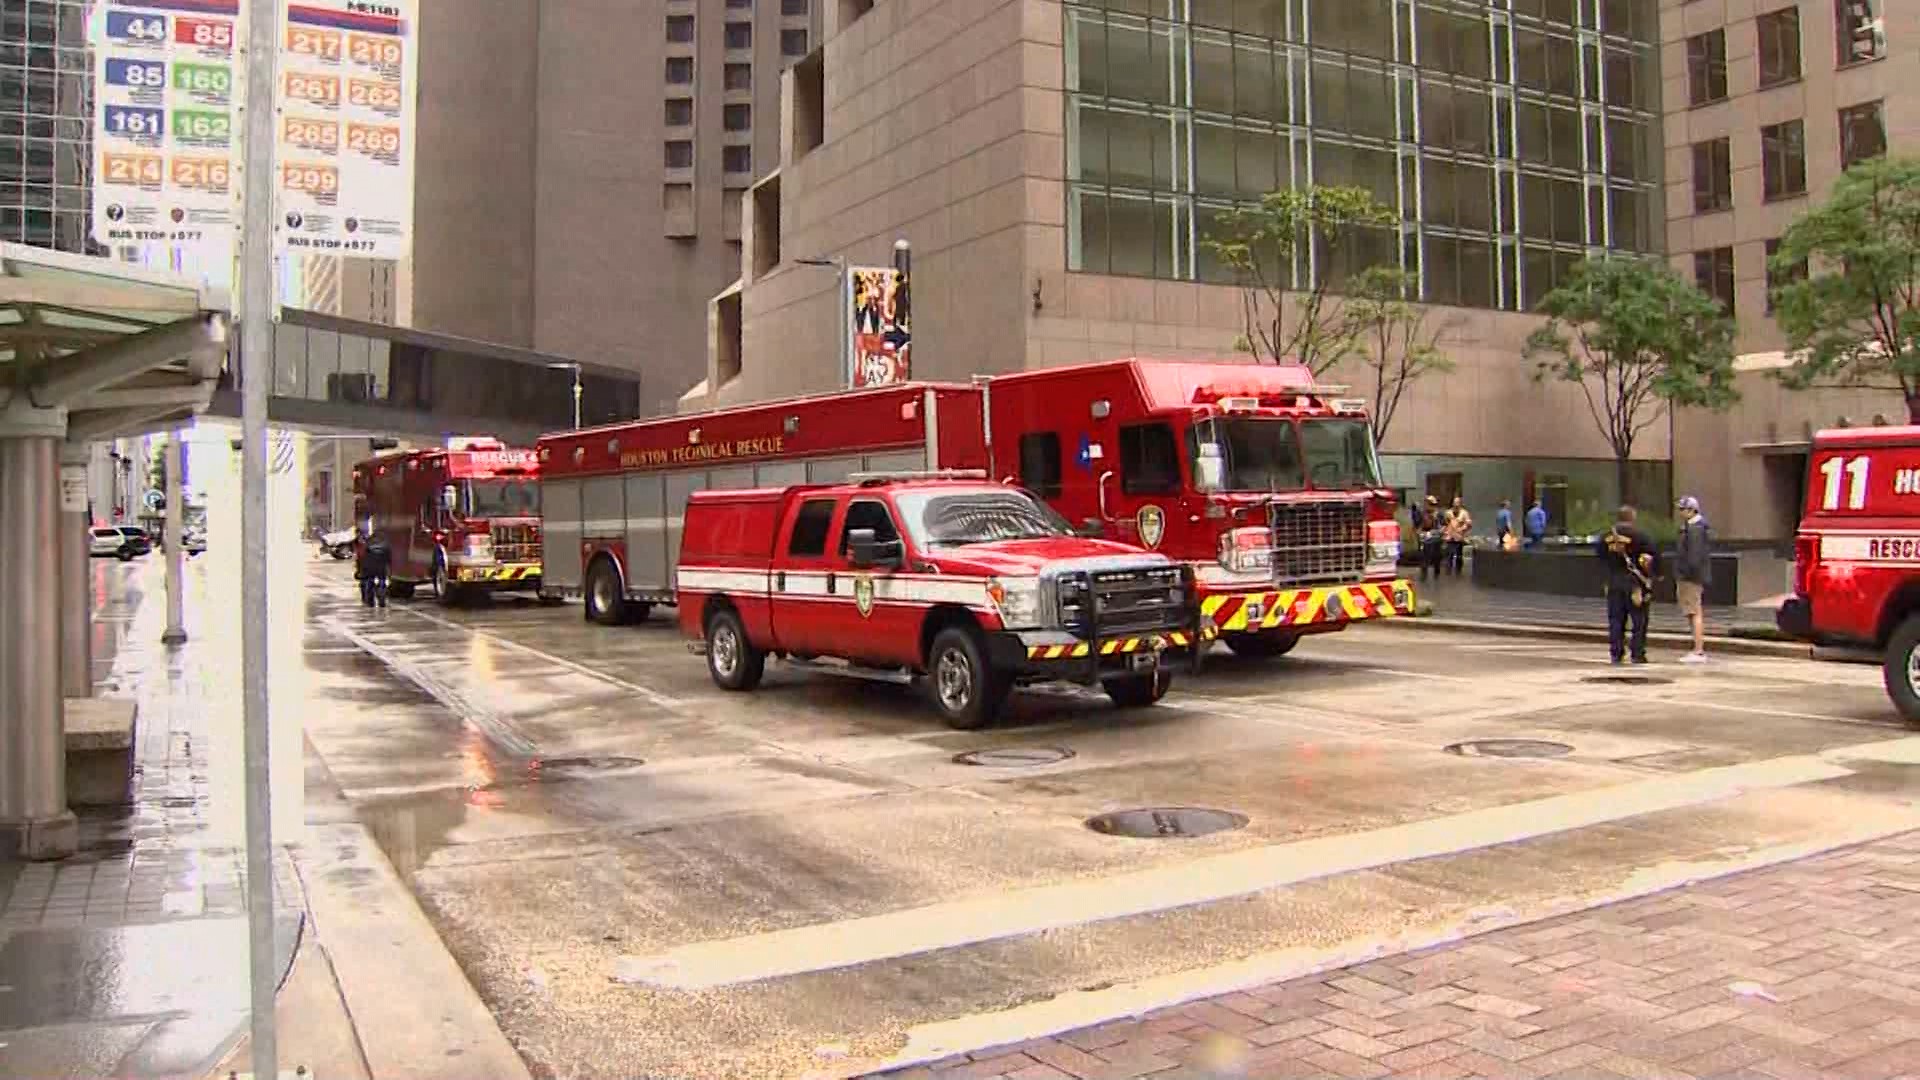 They were stuck on the 40th floor of the building at 1100 Louisiana, according to HFD.